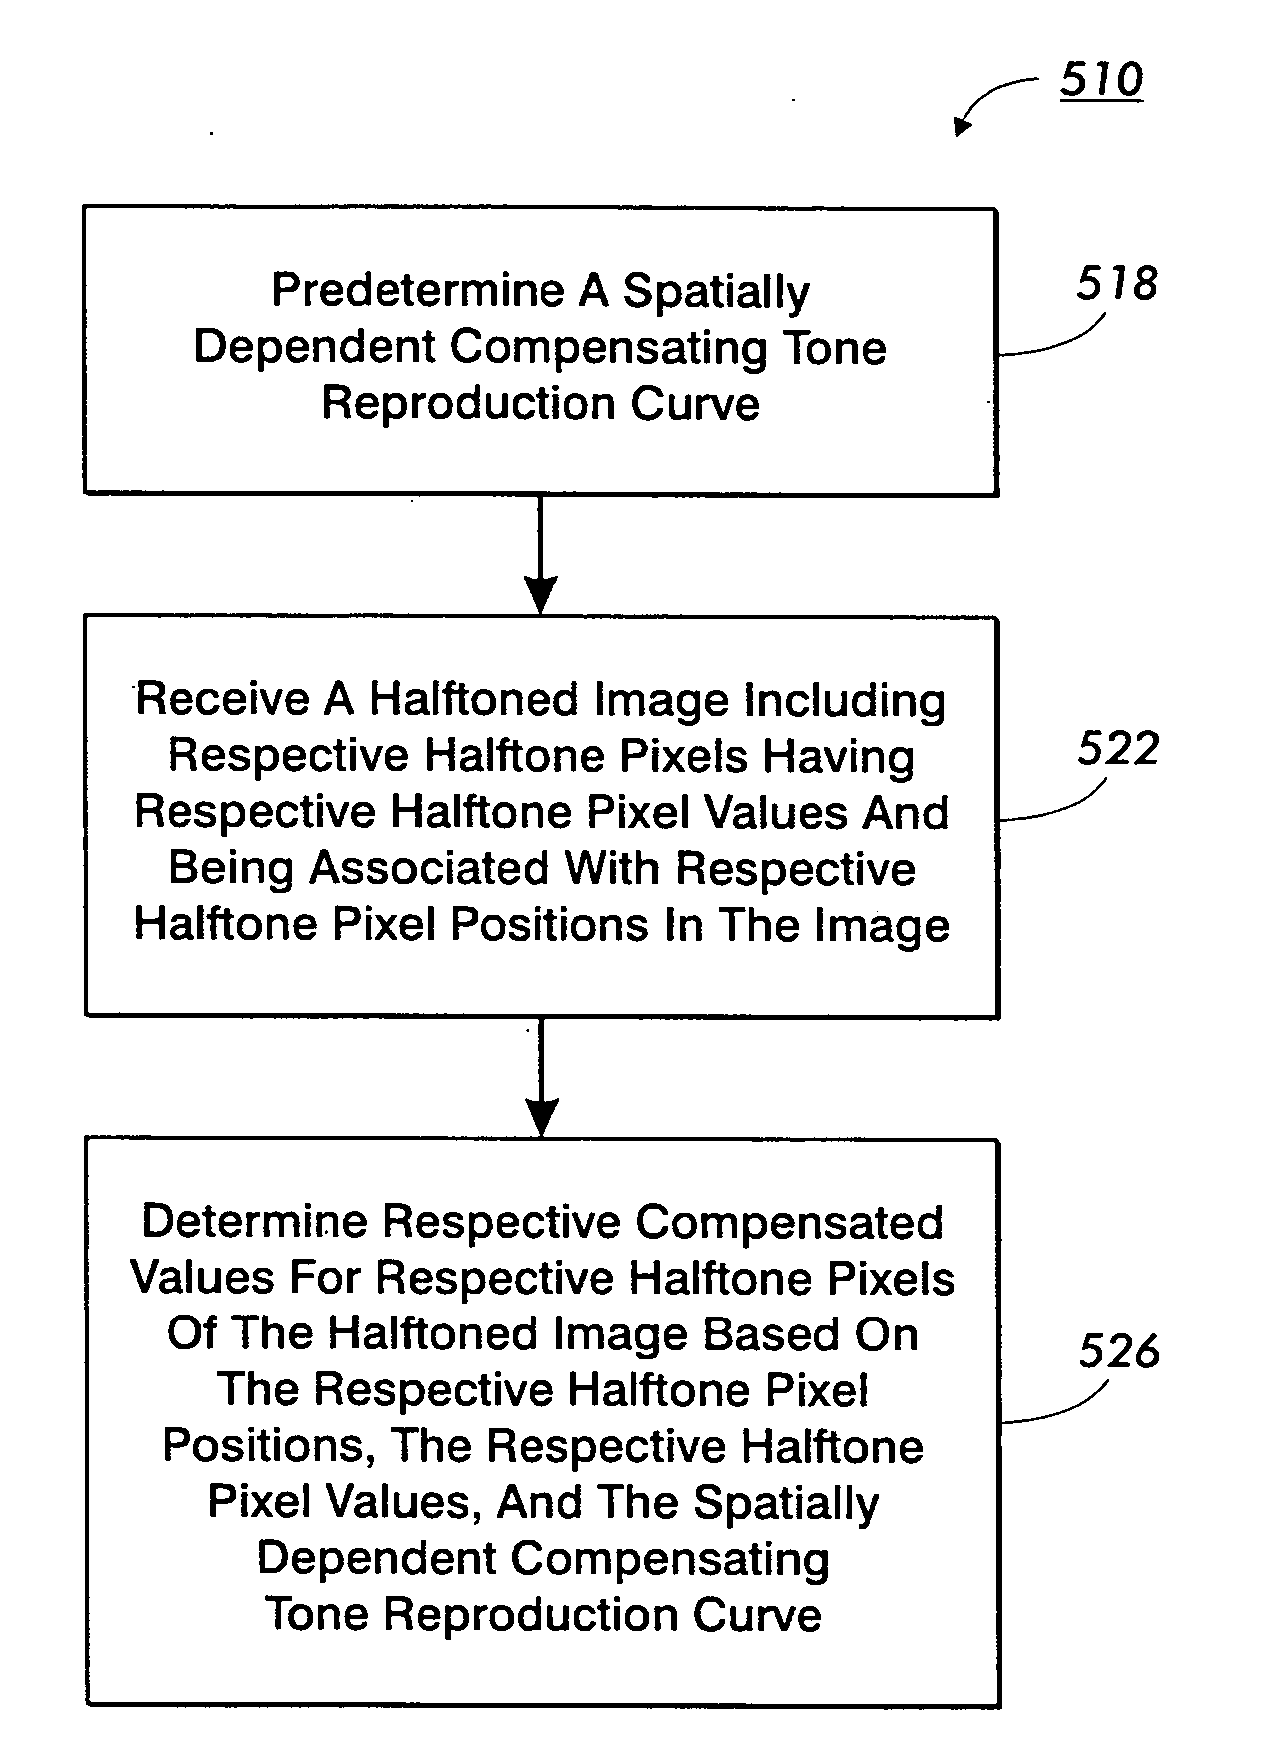 Uniformity compensation in halftoned images